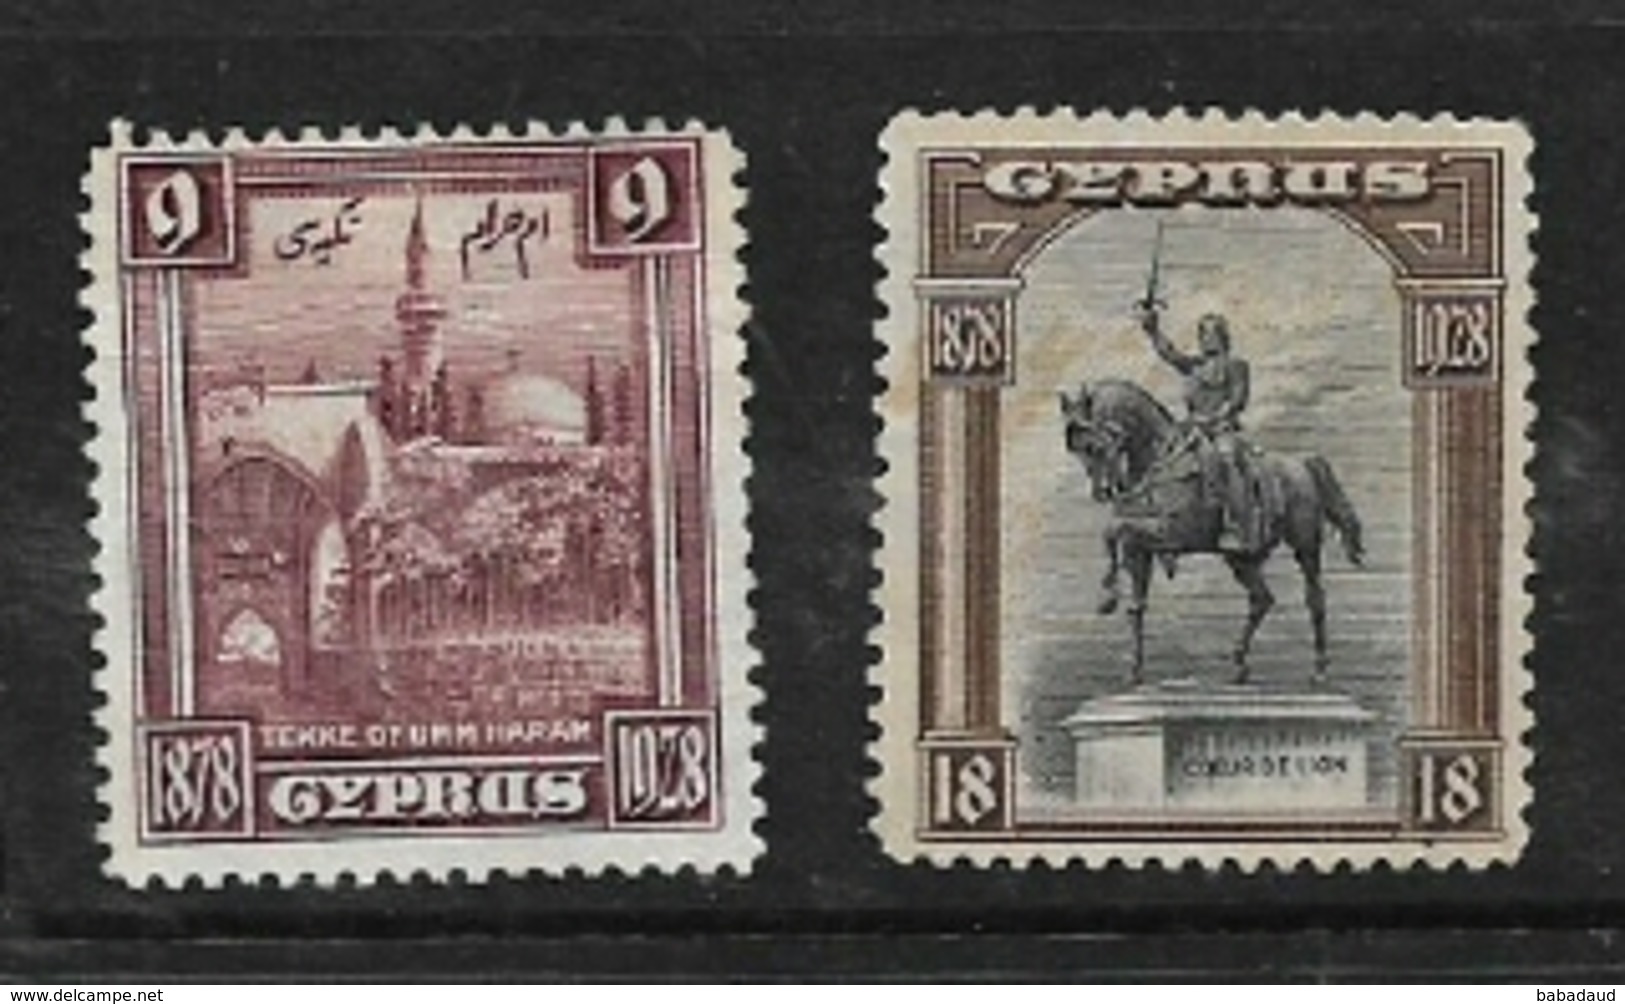 Cyprus, GVR, 1928, 50th Anniversary, 9p, 18p, Cleaned To Seem Unused, Cleaned,probably Fiscally Used - Cyprus (...-1960)